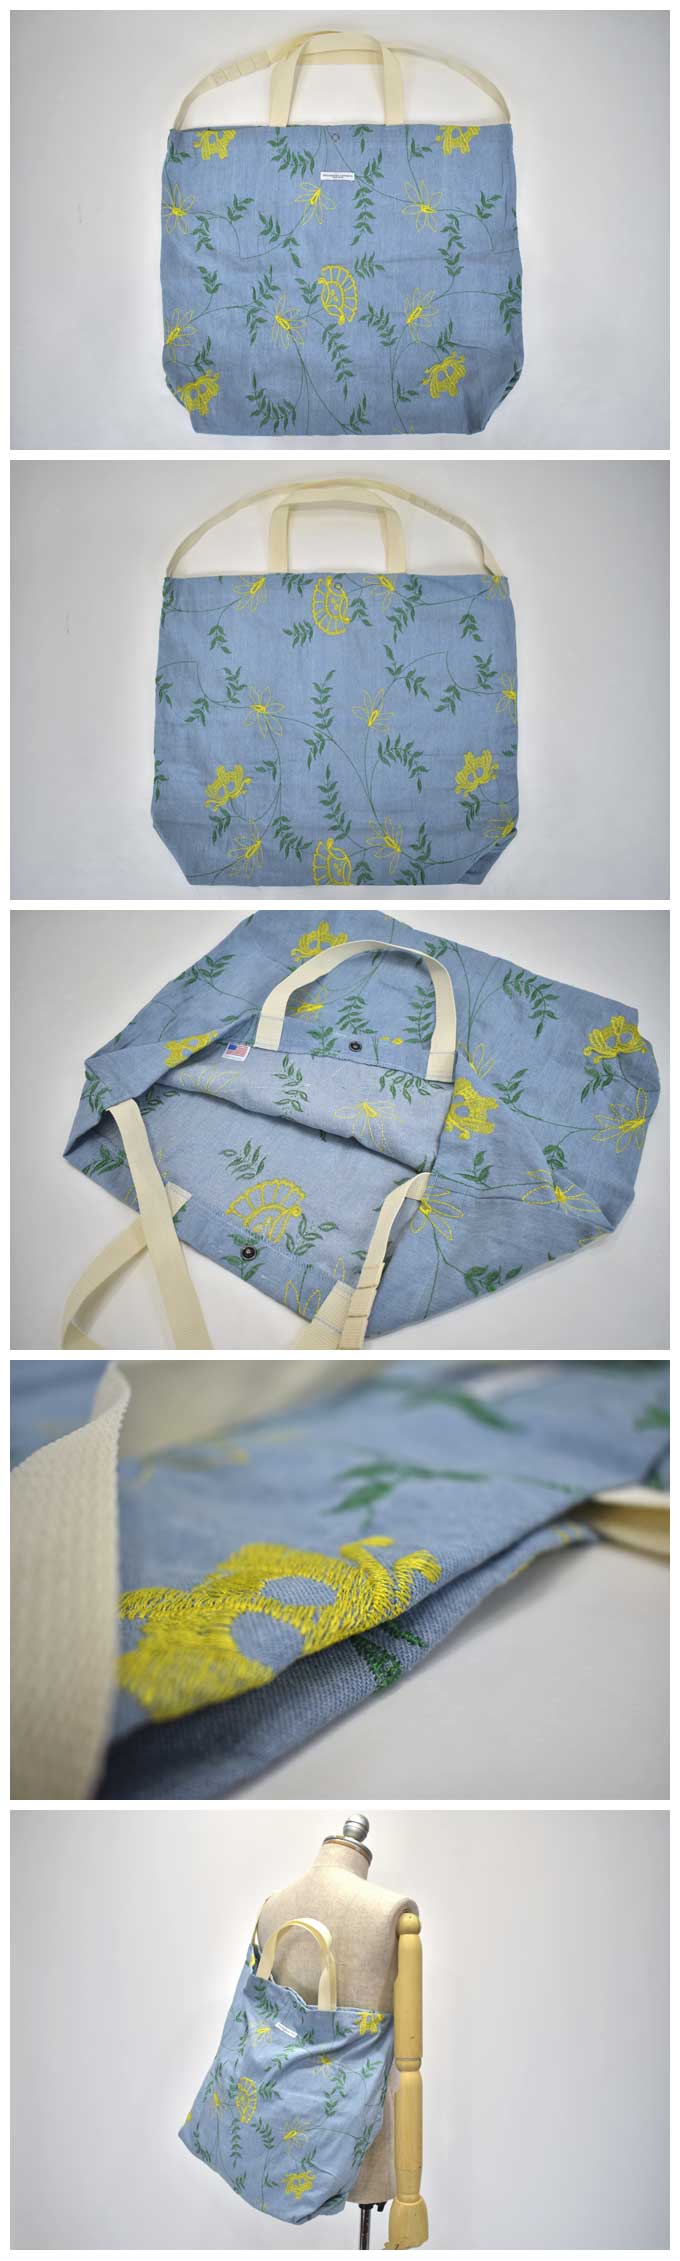 ENGINEERED GARMENTS Carry All Tote (Denim Floral)